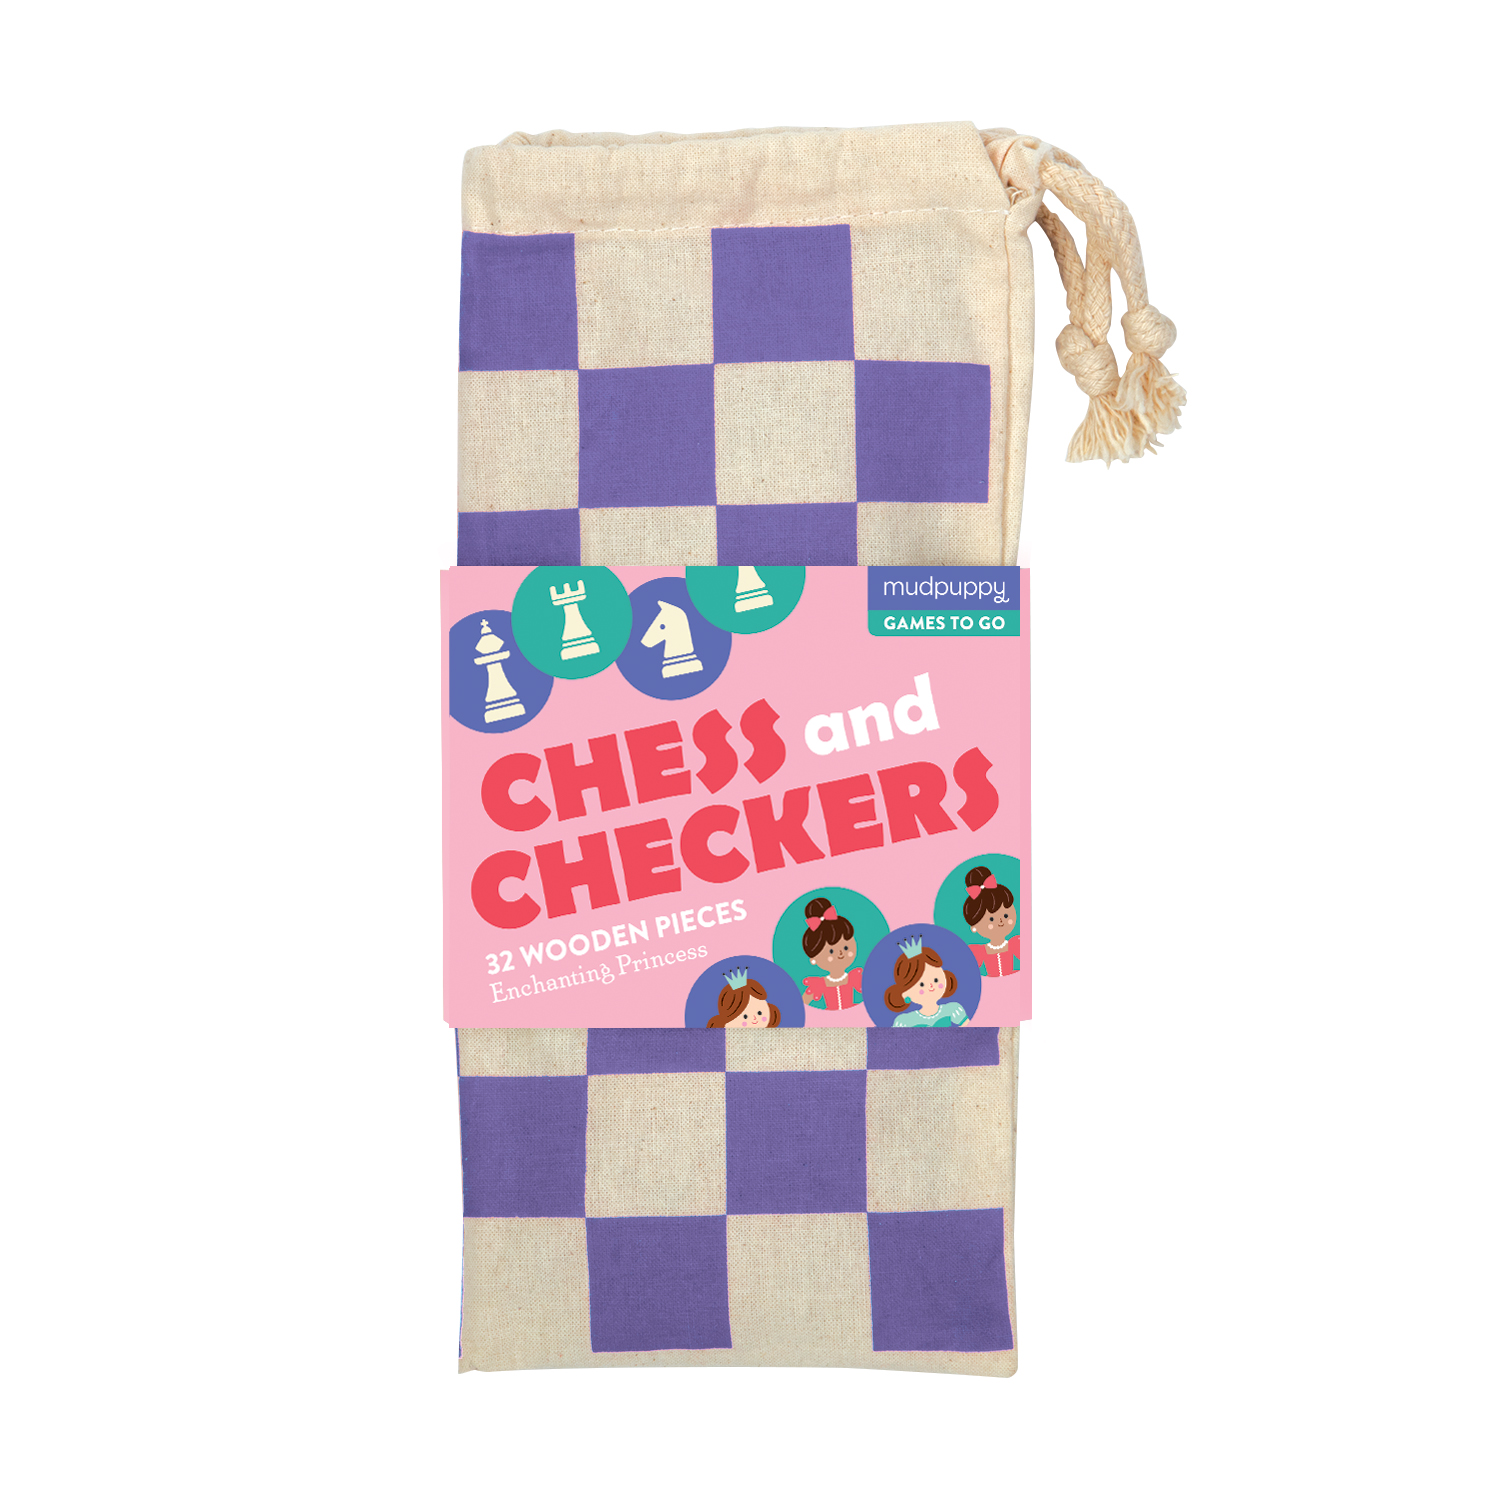 Mudpuppy Checkers and Chess Enchanted Princesses Game